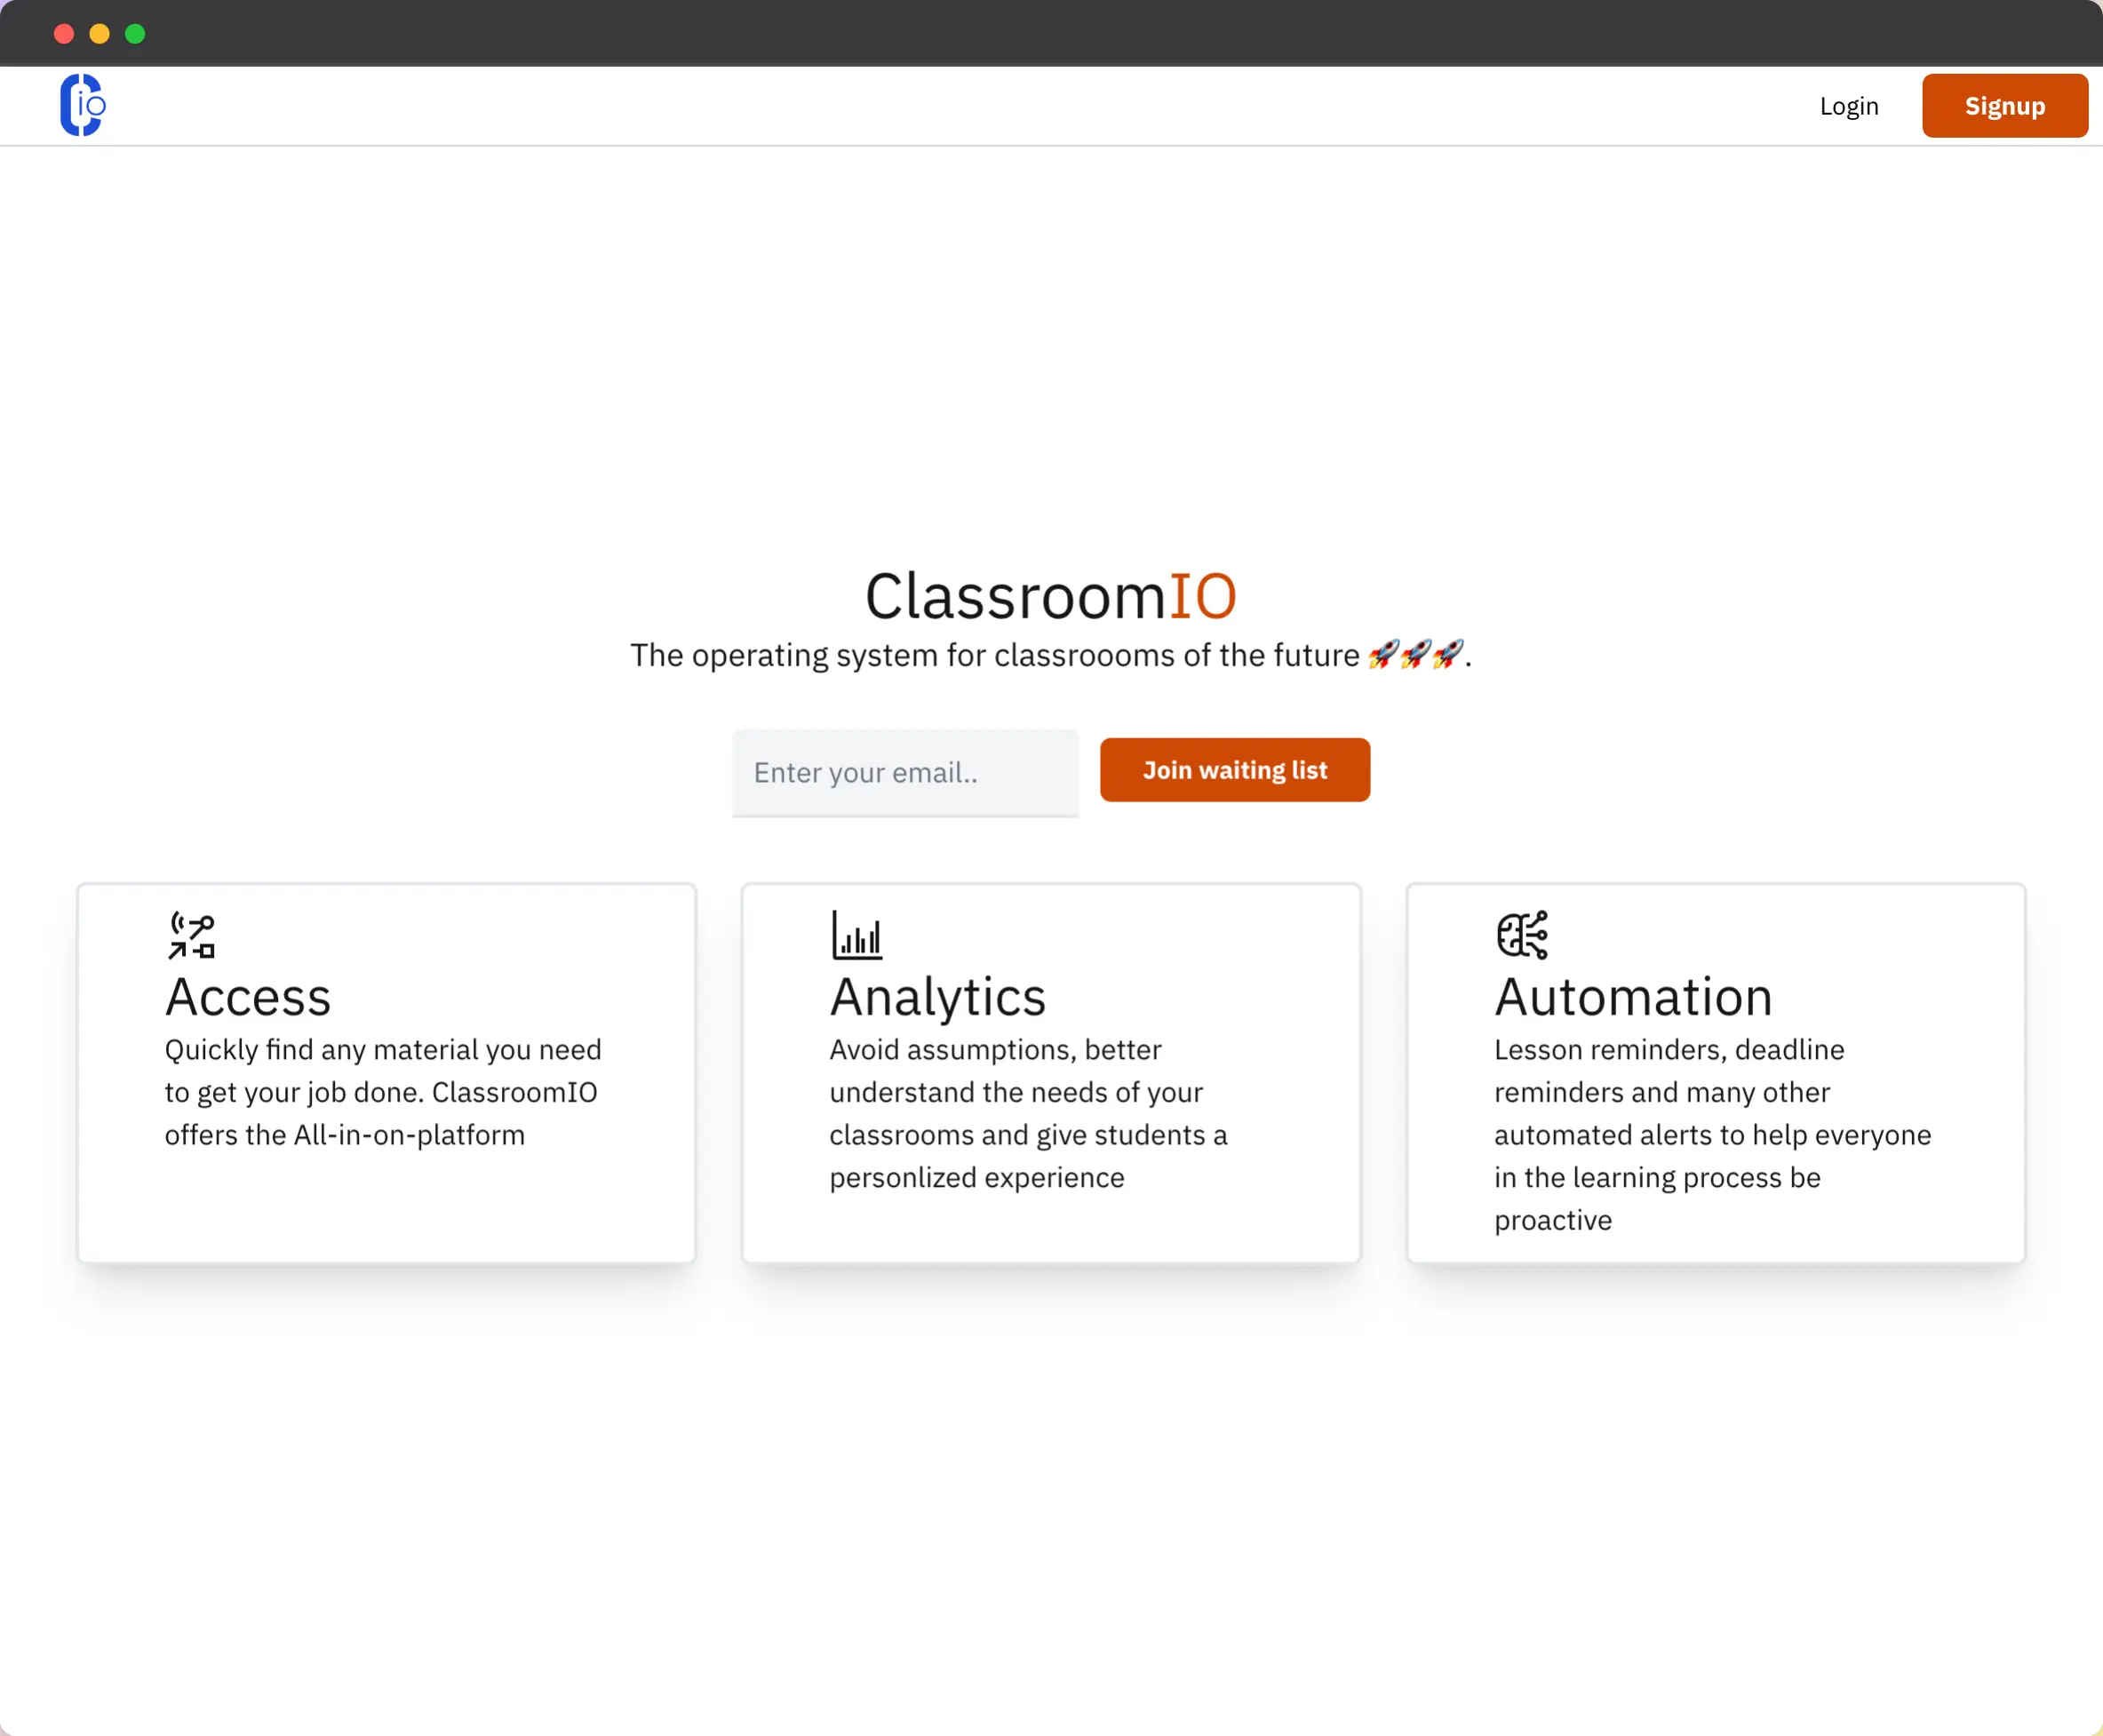 ClassroomIO website with a navigation bar at the top of the page containing the logo on the left along with the login and signup button on the right. Also, the page contains an email field with a Join waiting list button.